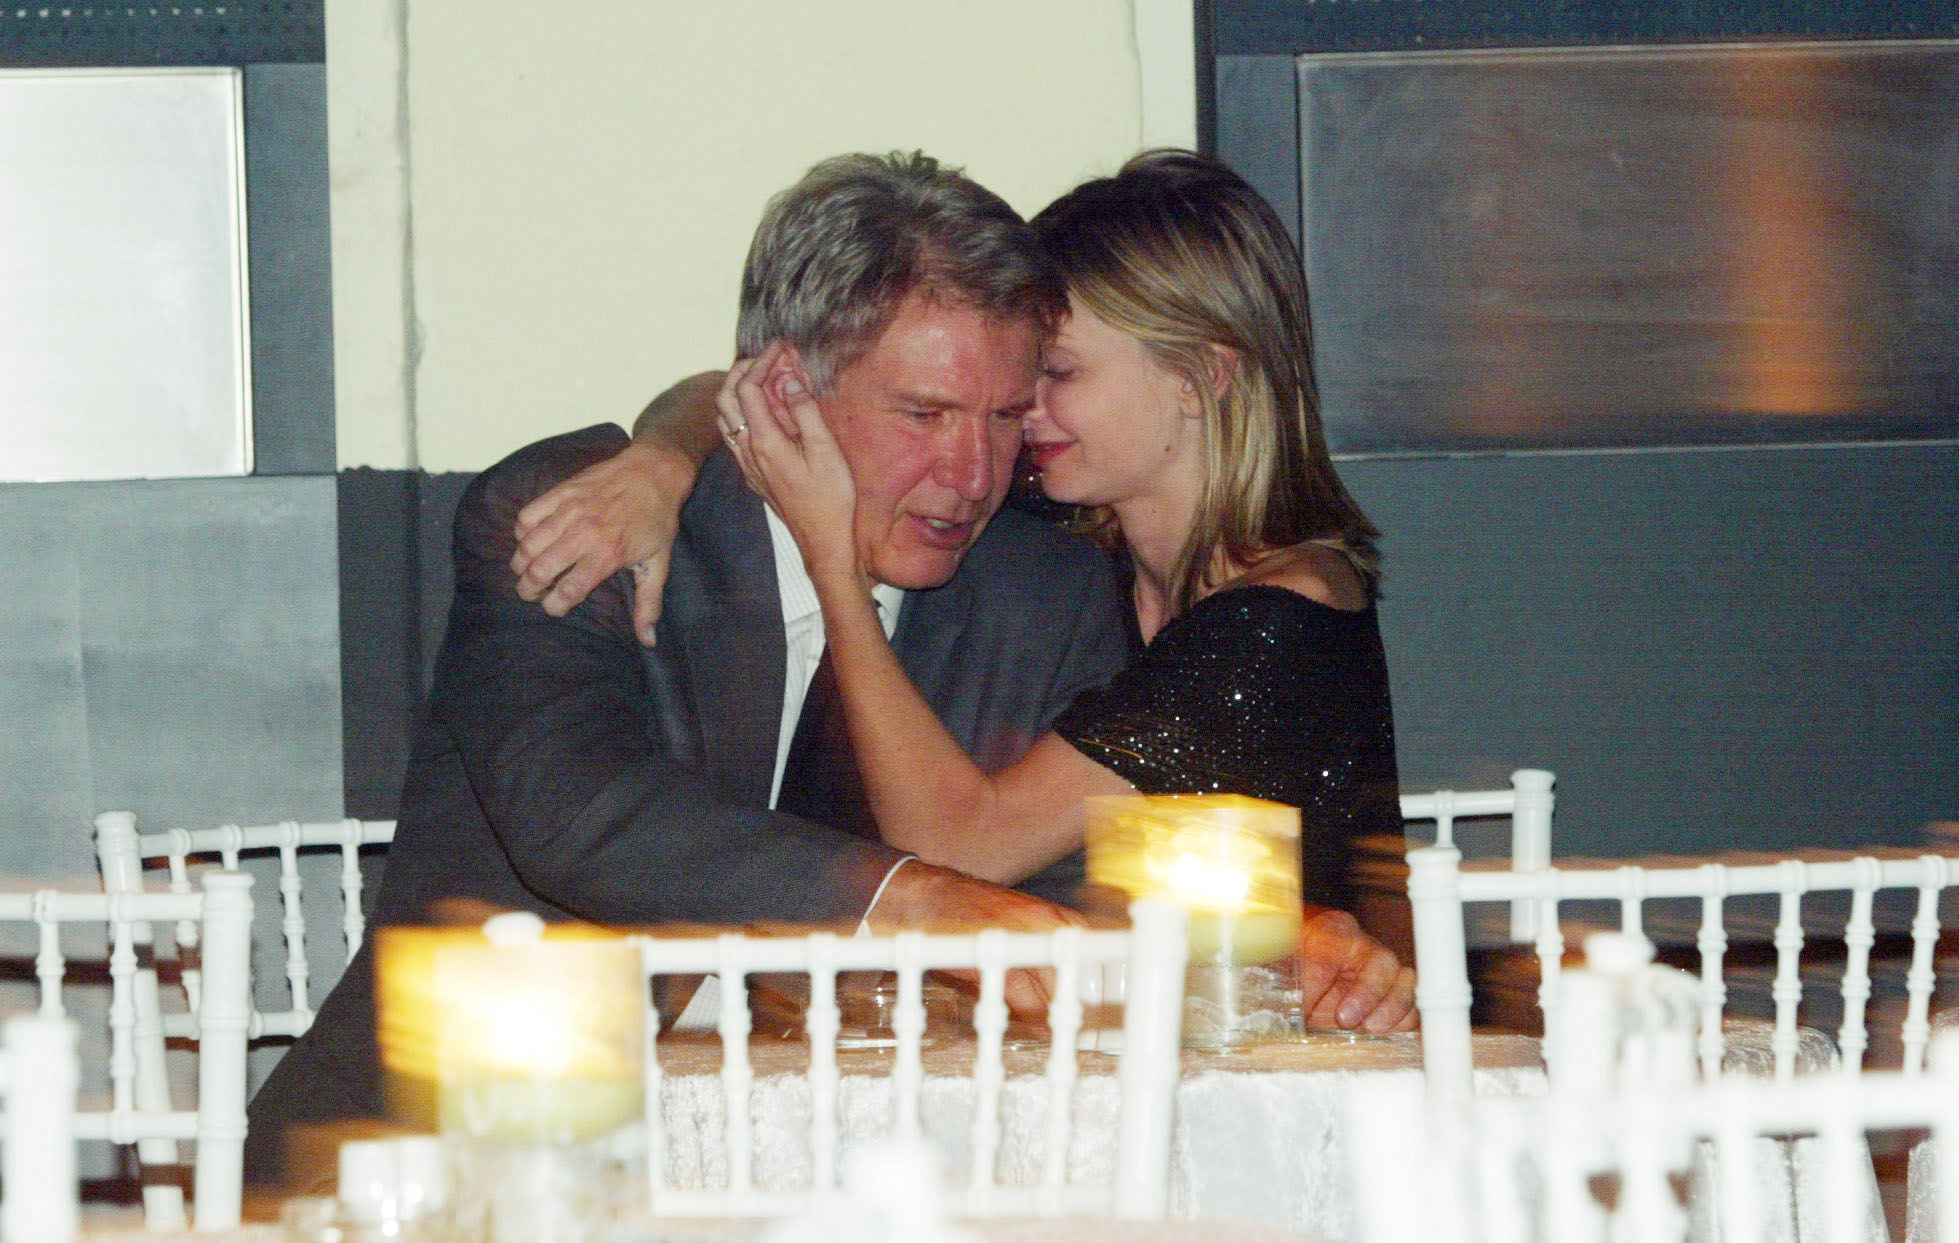 Harrison Ford with his partner | Source: Getty Images